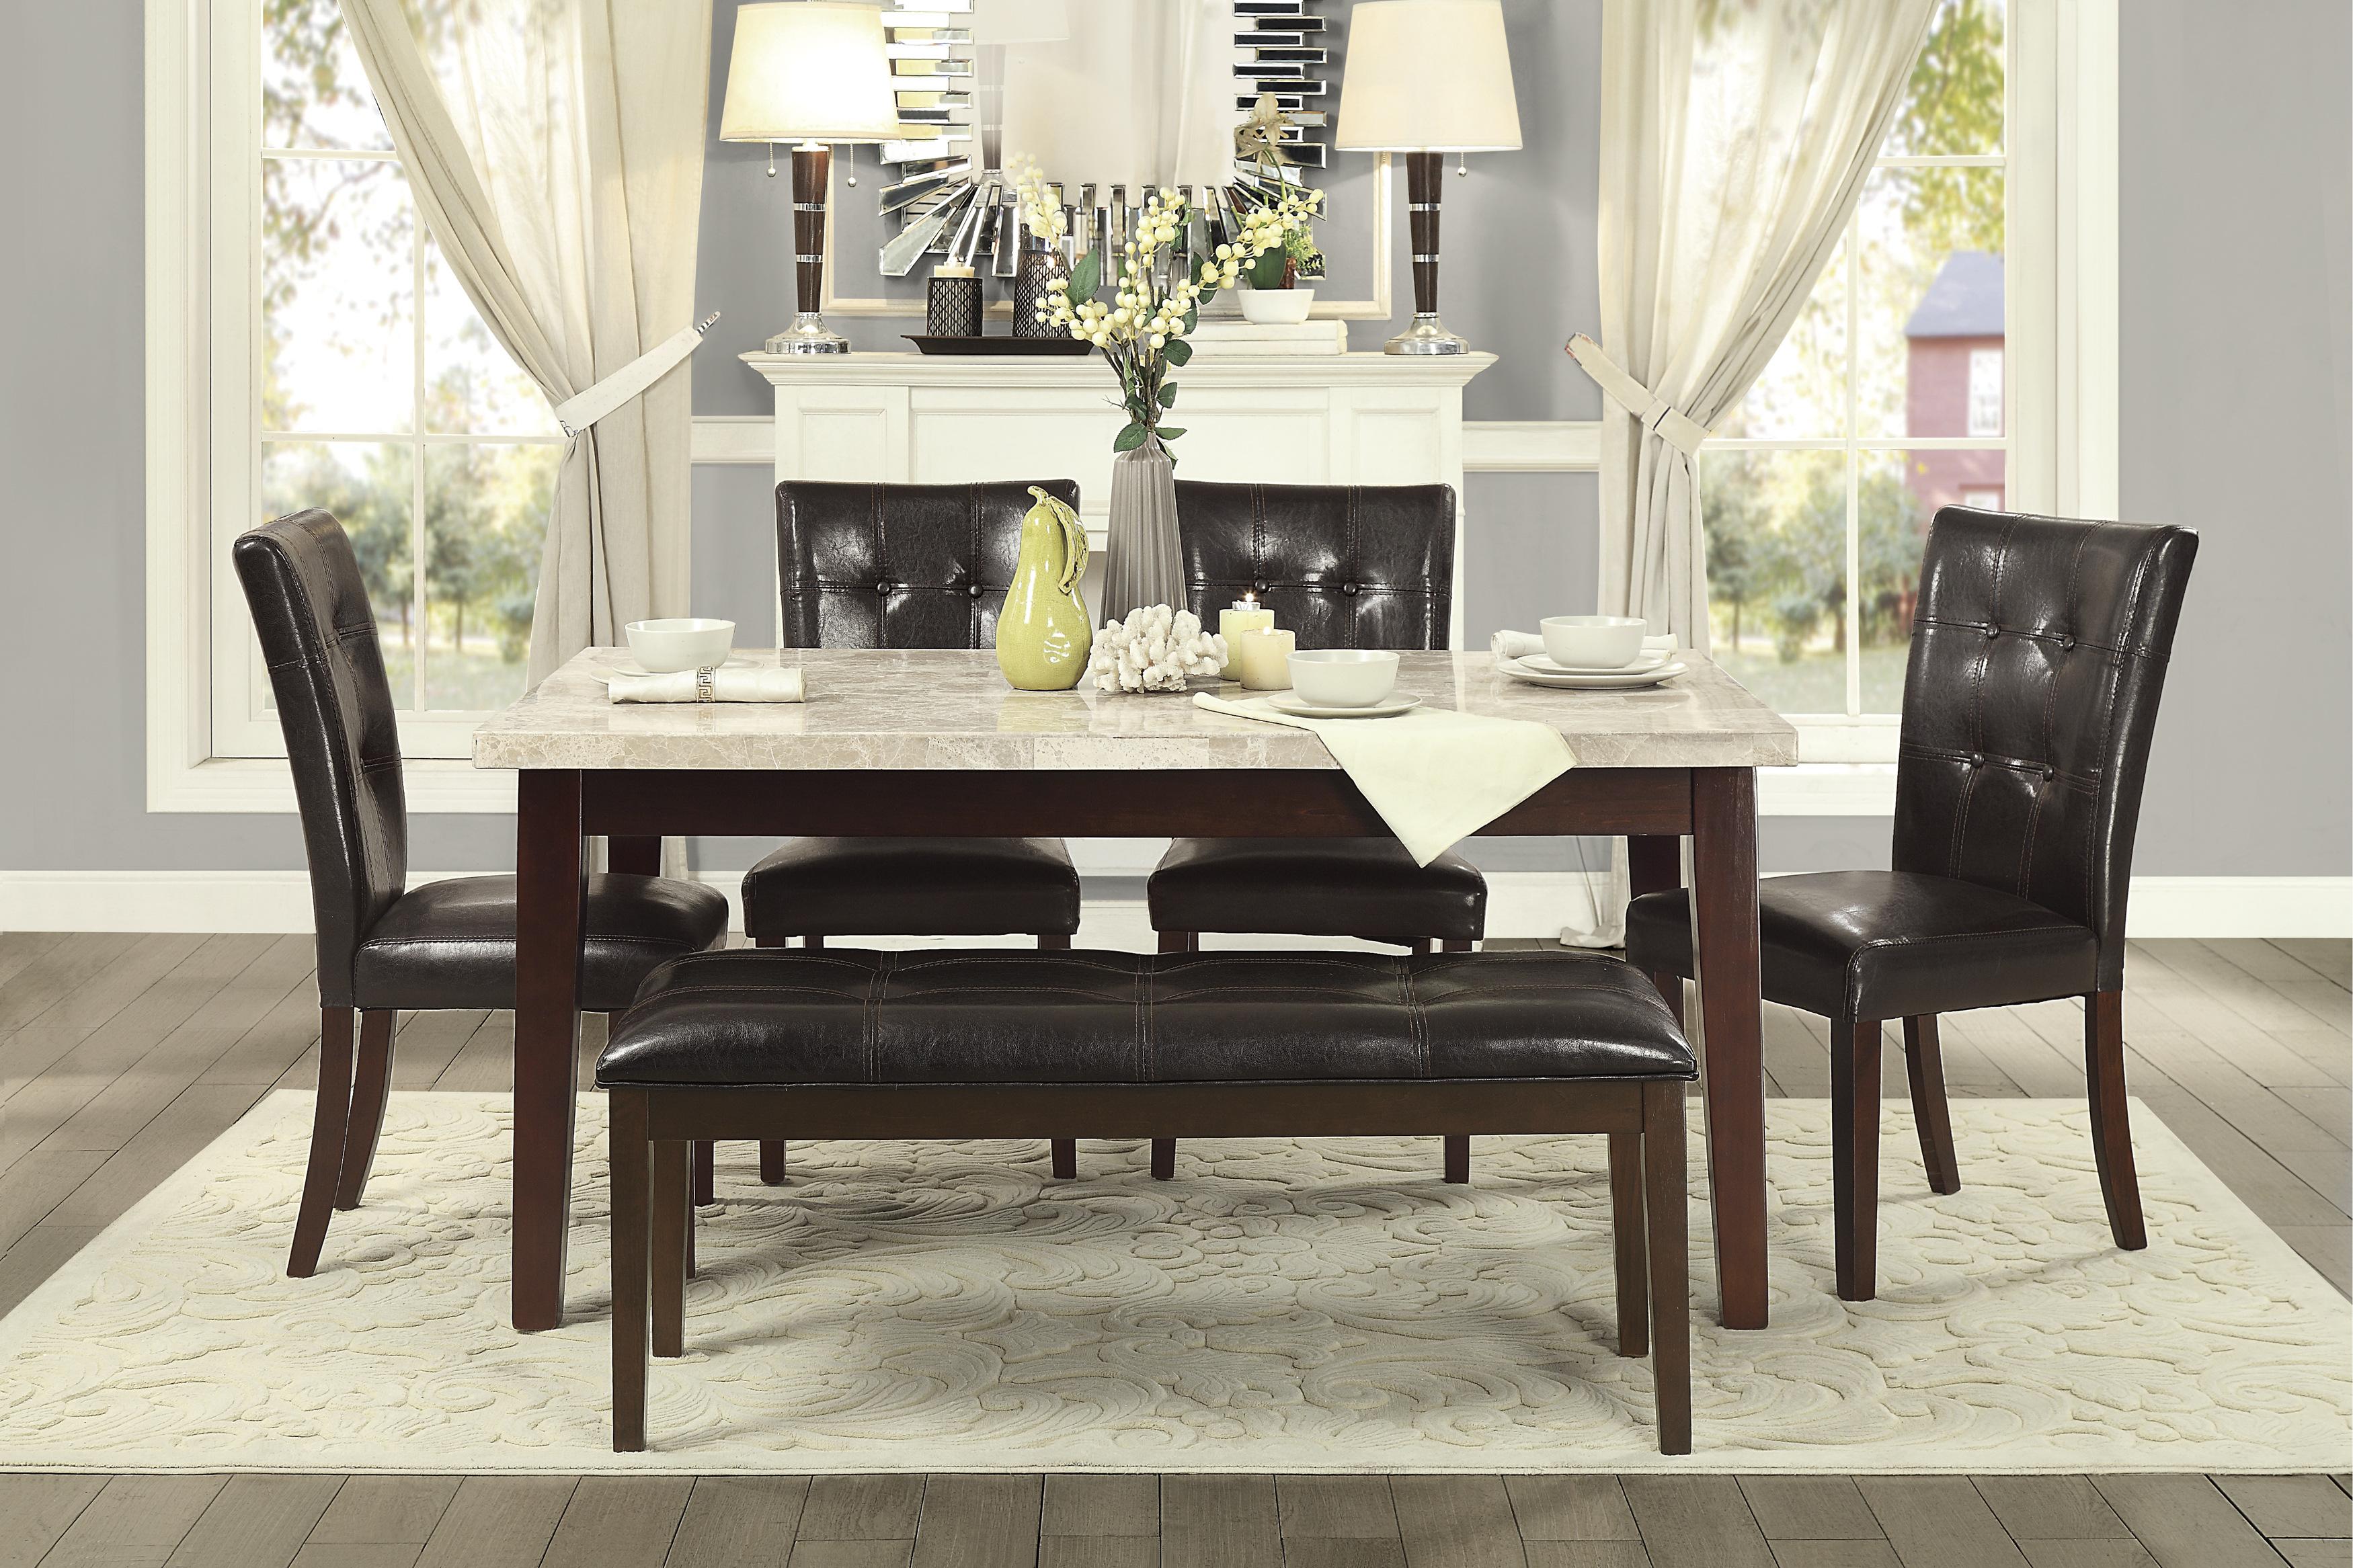 Transitional Dining Room Set 2456-64WM*6PC Decatur 2456-64WM*6PC in Espresso, White Faux Leather